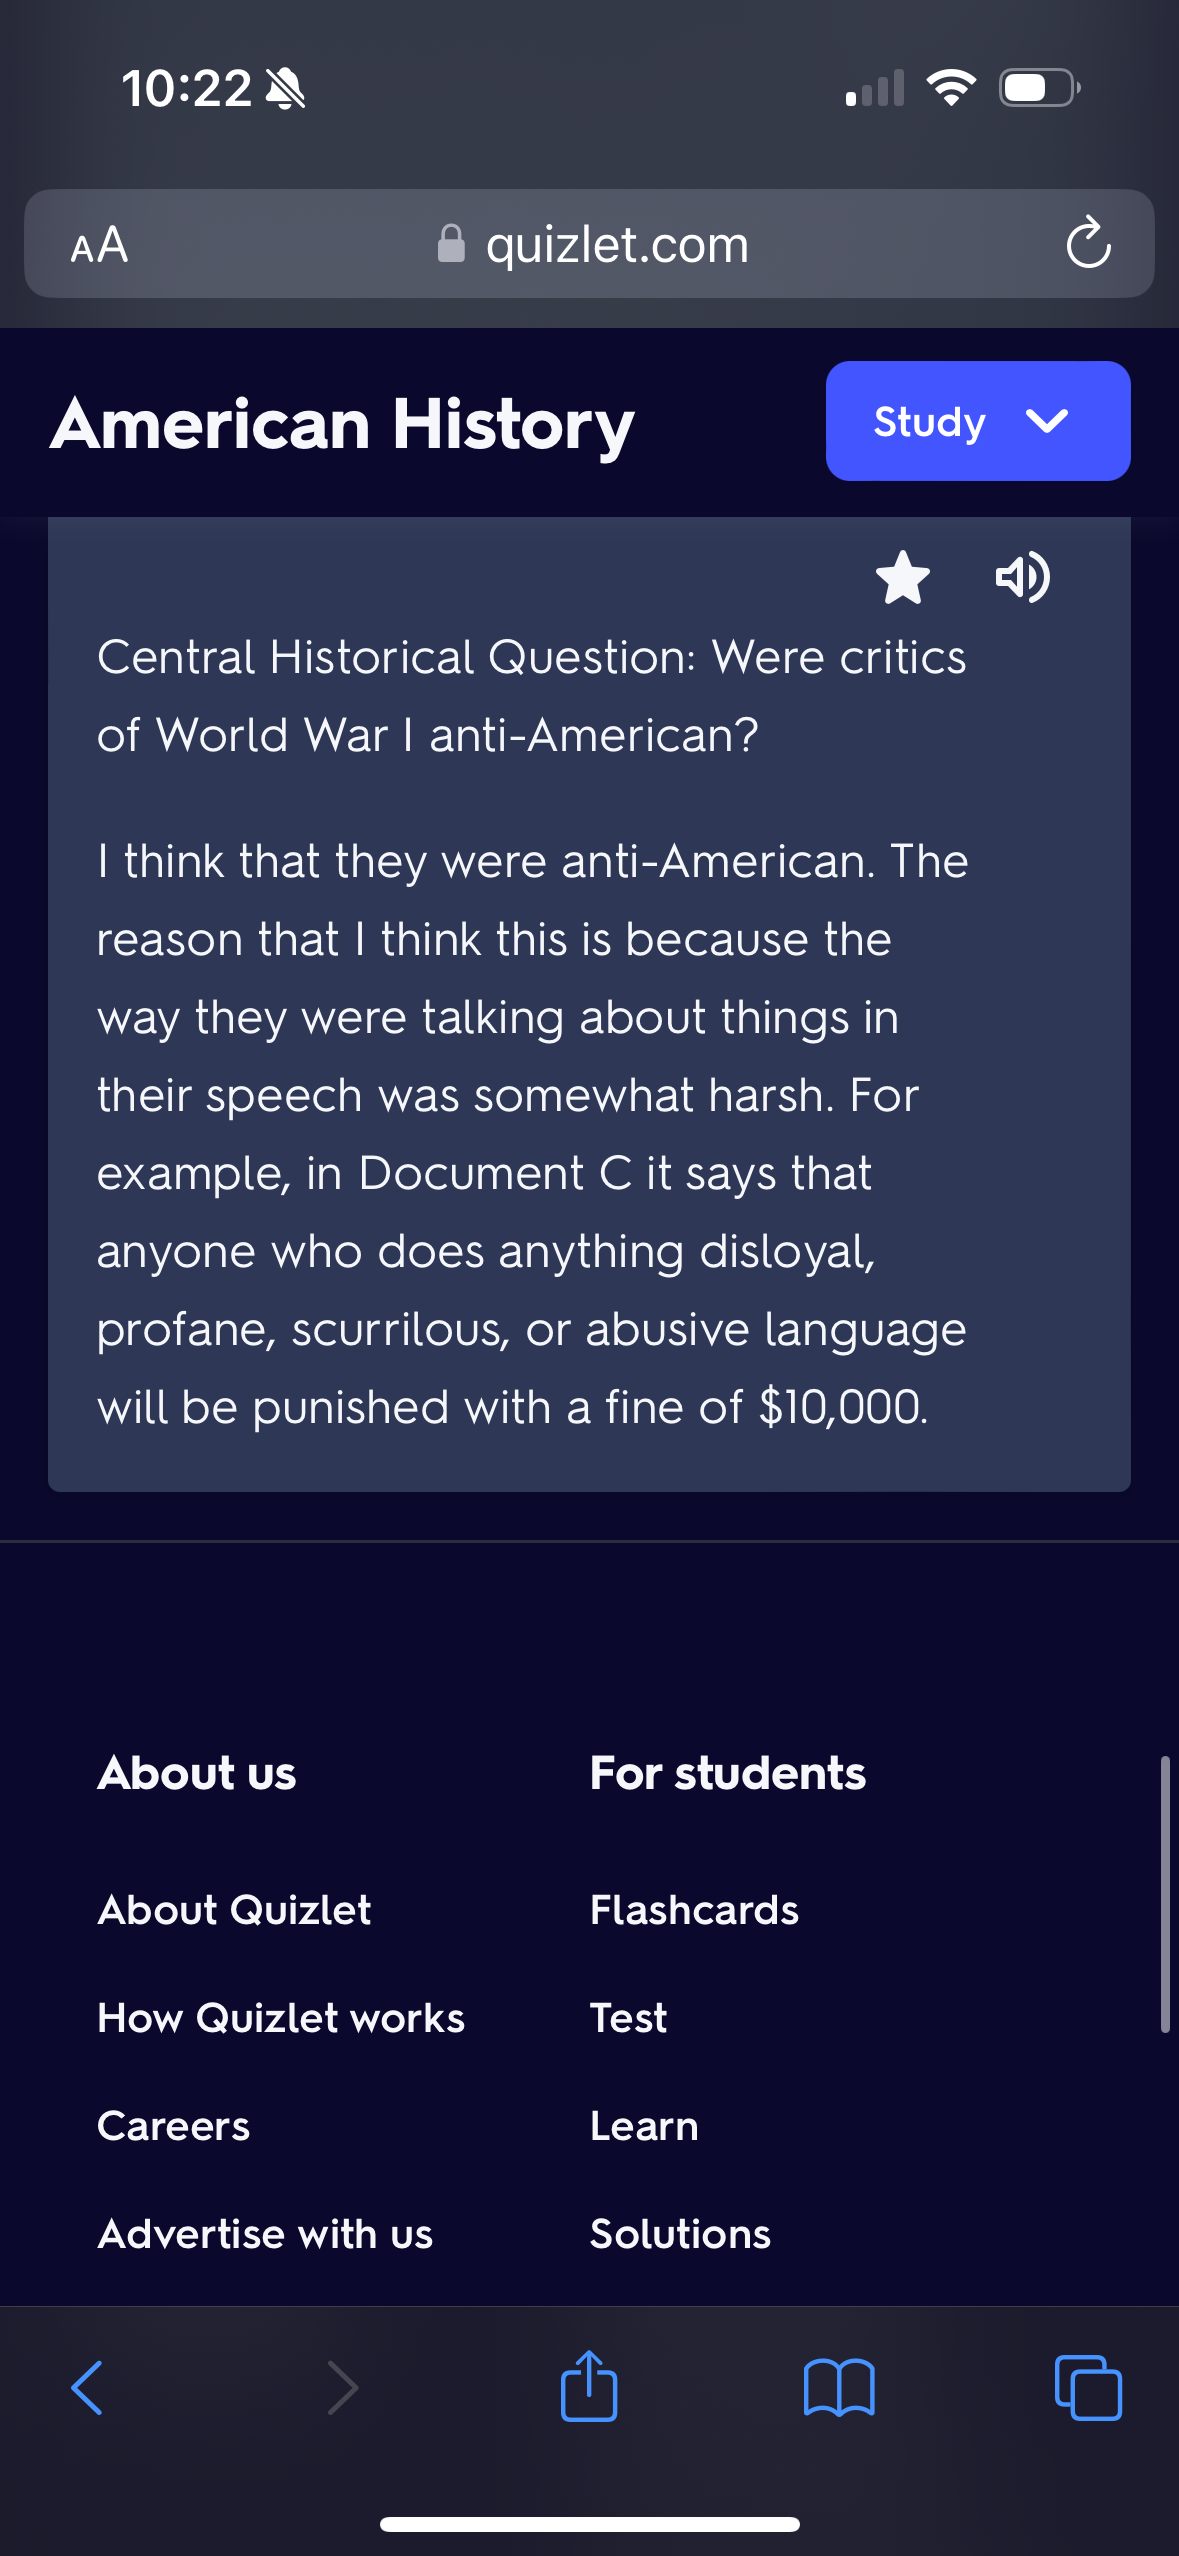 10:22
AA
American History
About us
Central Historical Question: Were critics
of World War I anti-American?
About Quizlet
quizlet.com
I think that they were anti-American. The
reason that I think this is because the
way they were talking about things in
their speech was somewhat harsh. For
example, in Document C it says that
anyone who does anything disloyal,
profane, scurrilous, or abusive language
will be punished with a fine of $10,000.
How Quizlet works
Careers
Advertise with us
For students
Flashcards
Test
(Cª
Learn
Study ✓
Solutions